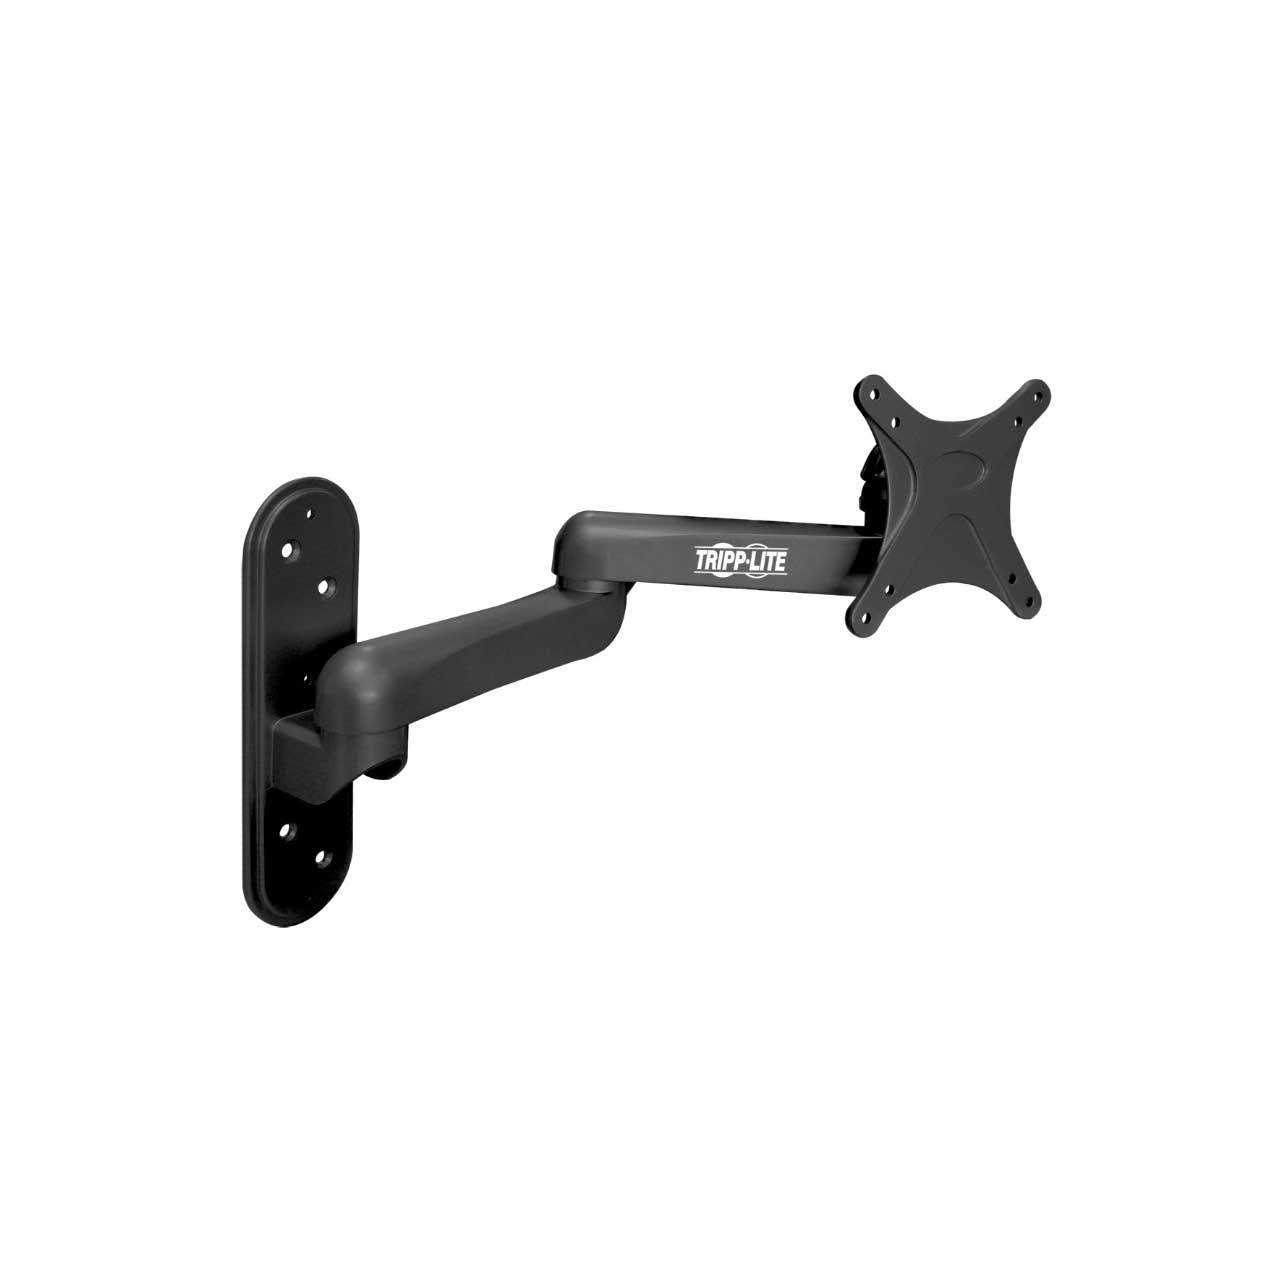 Tripp Lite DWM1327SE Swivel/Tilt Wall Mount for 13 Inch to 27 Inch TVs and  Monitors